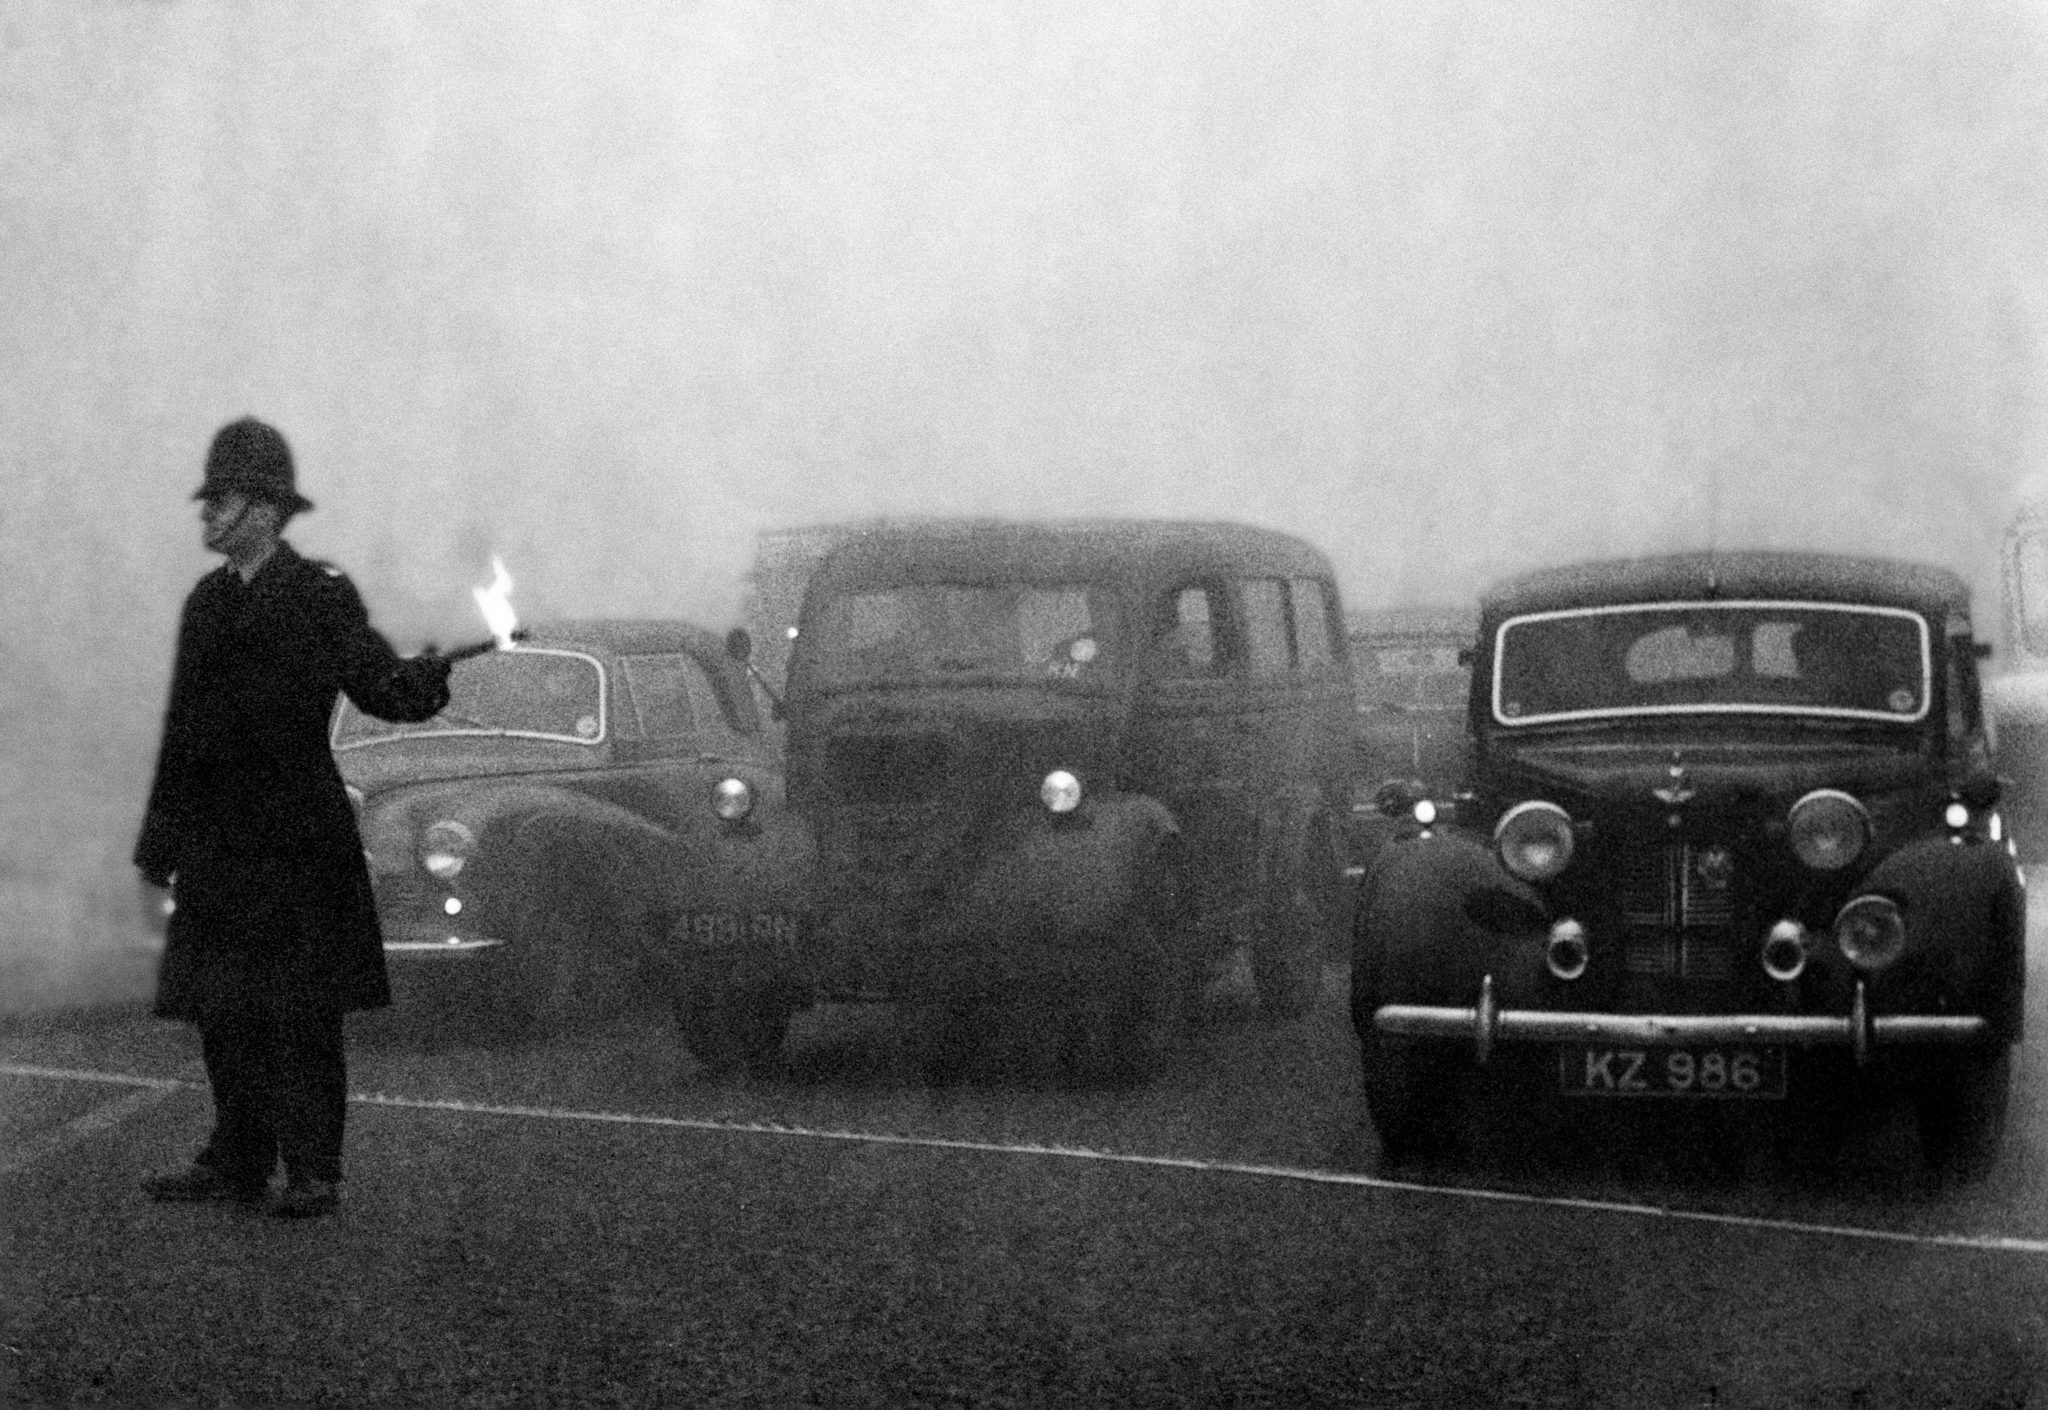 Policeman on point duty seen here using flares to guide the traffic during a heavy smog in London on December 8, 1952